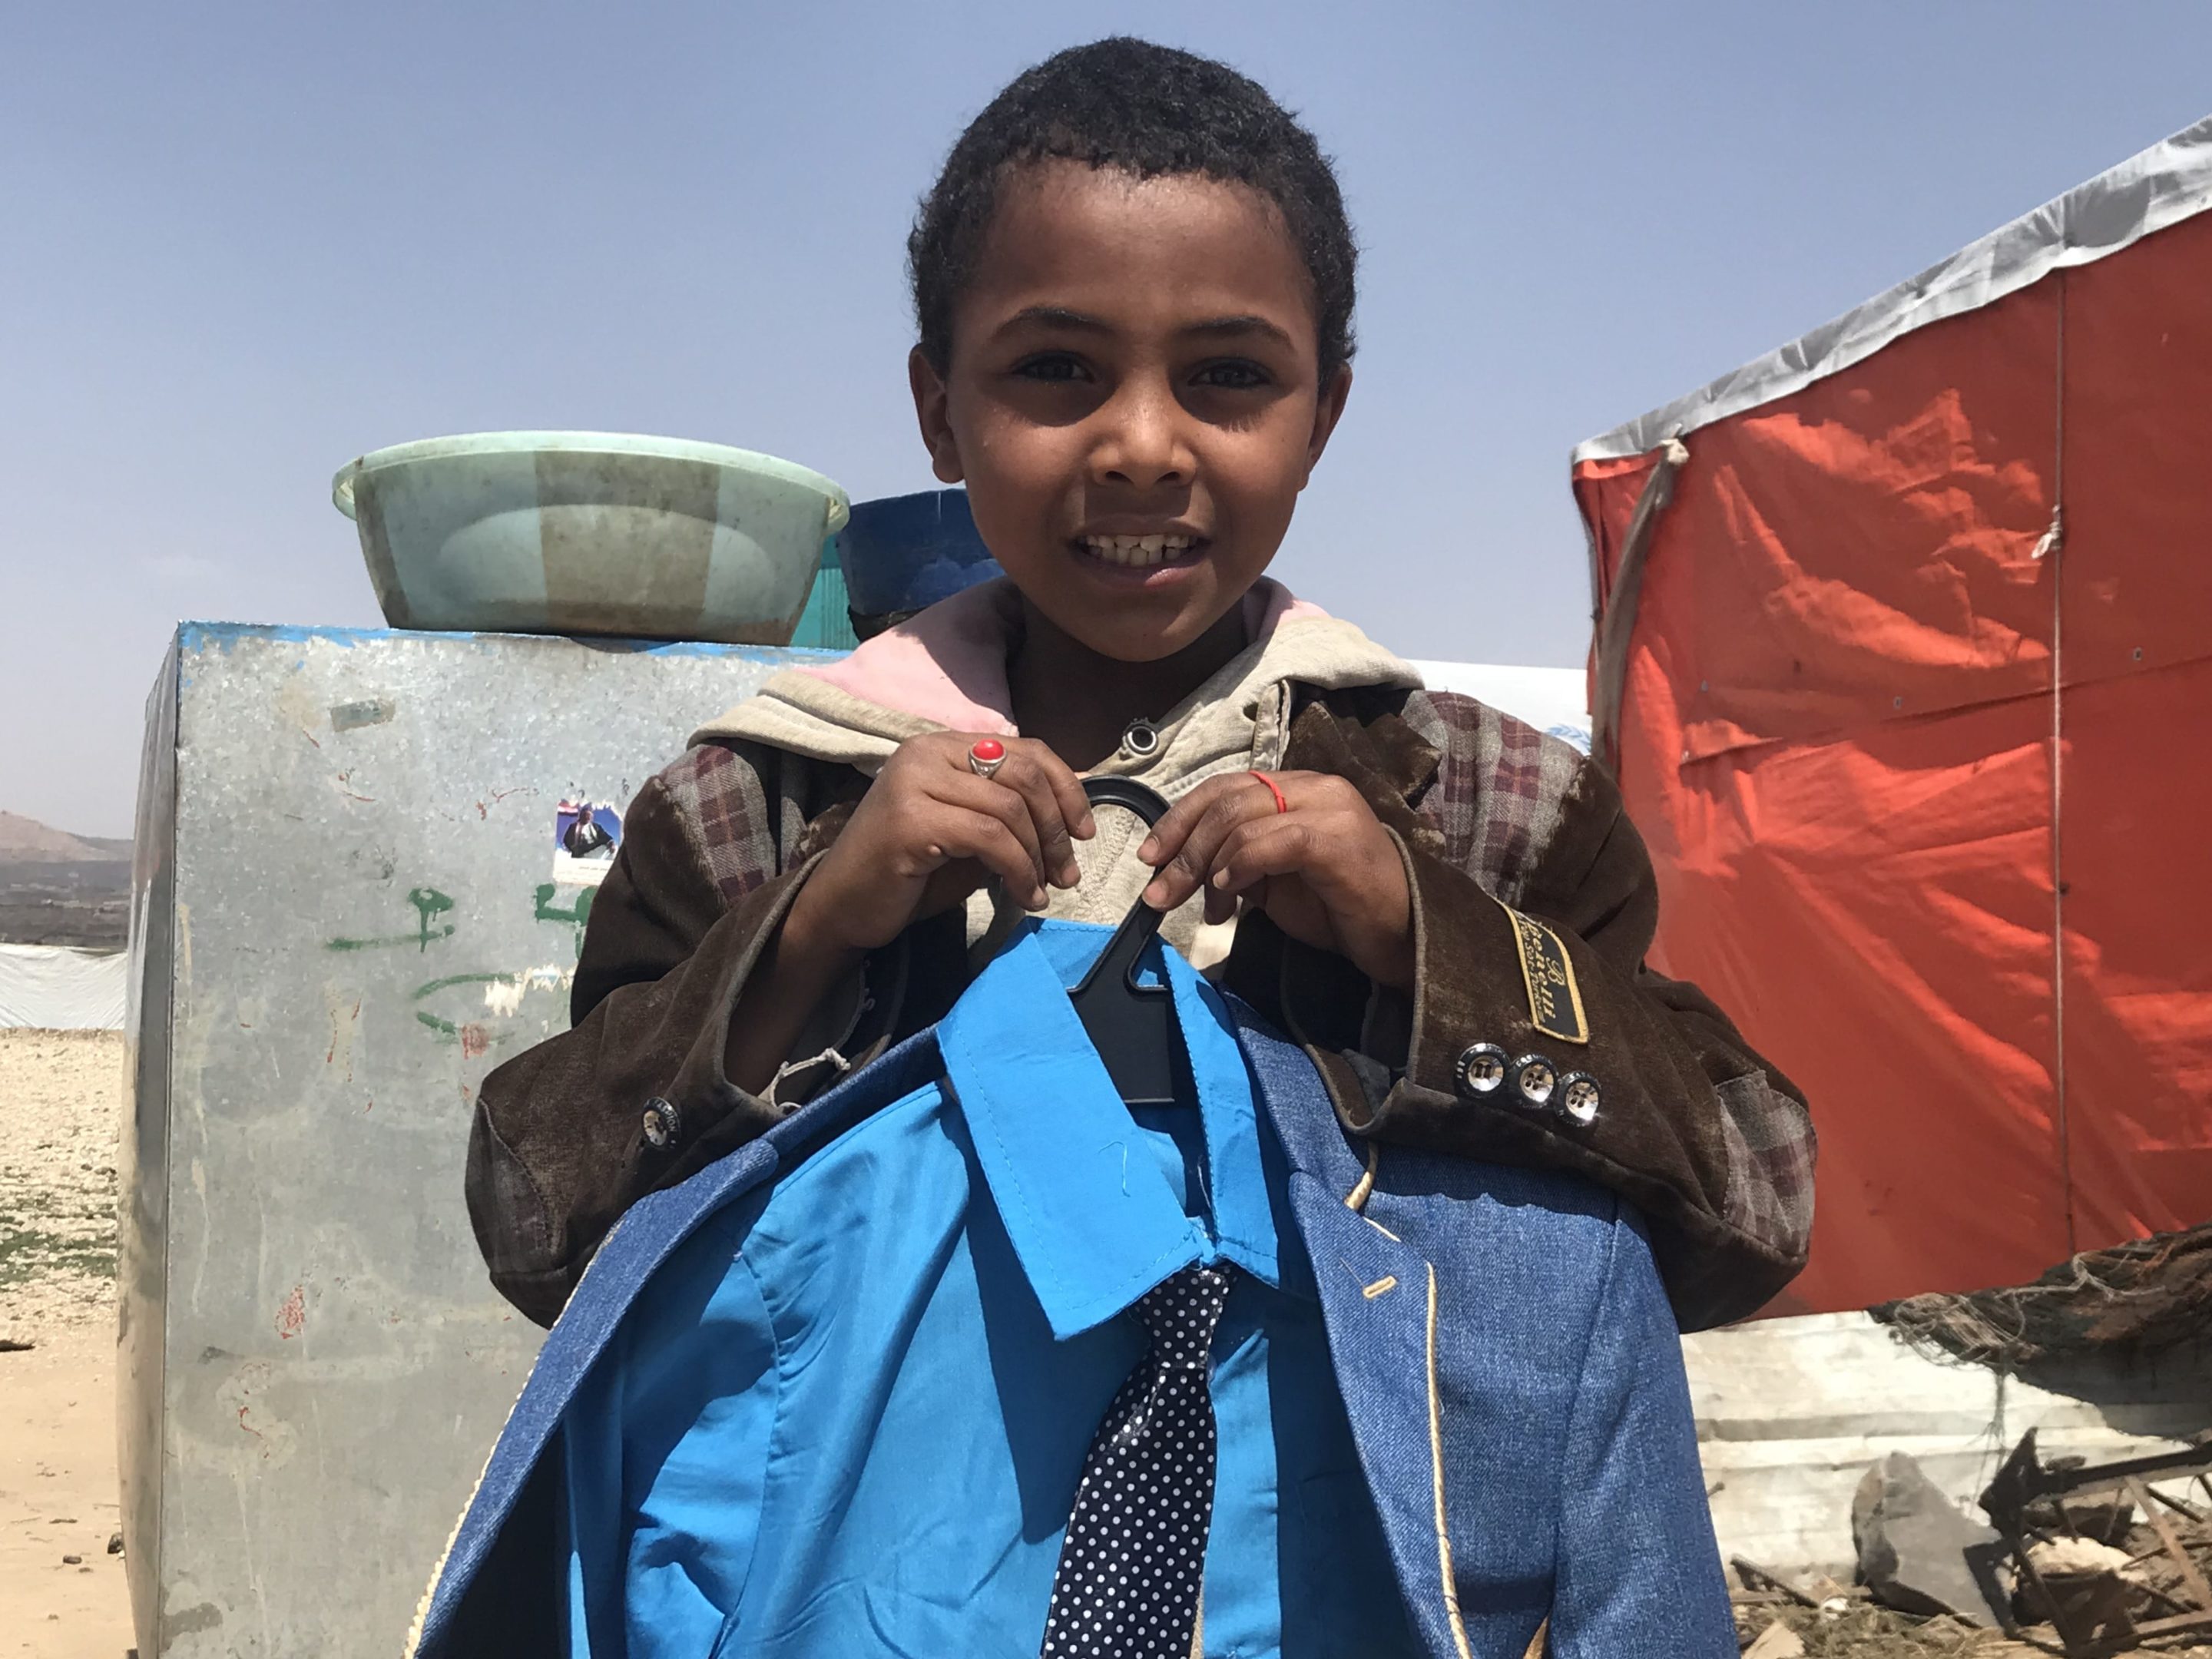 A young boy clutches new clothes to his chest